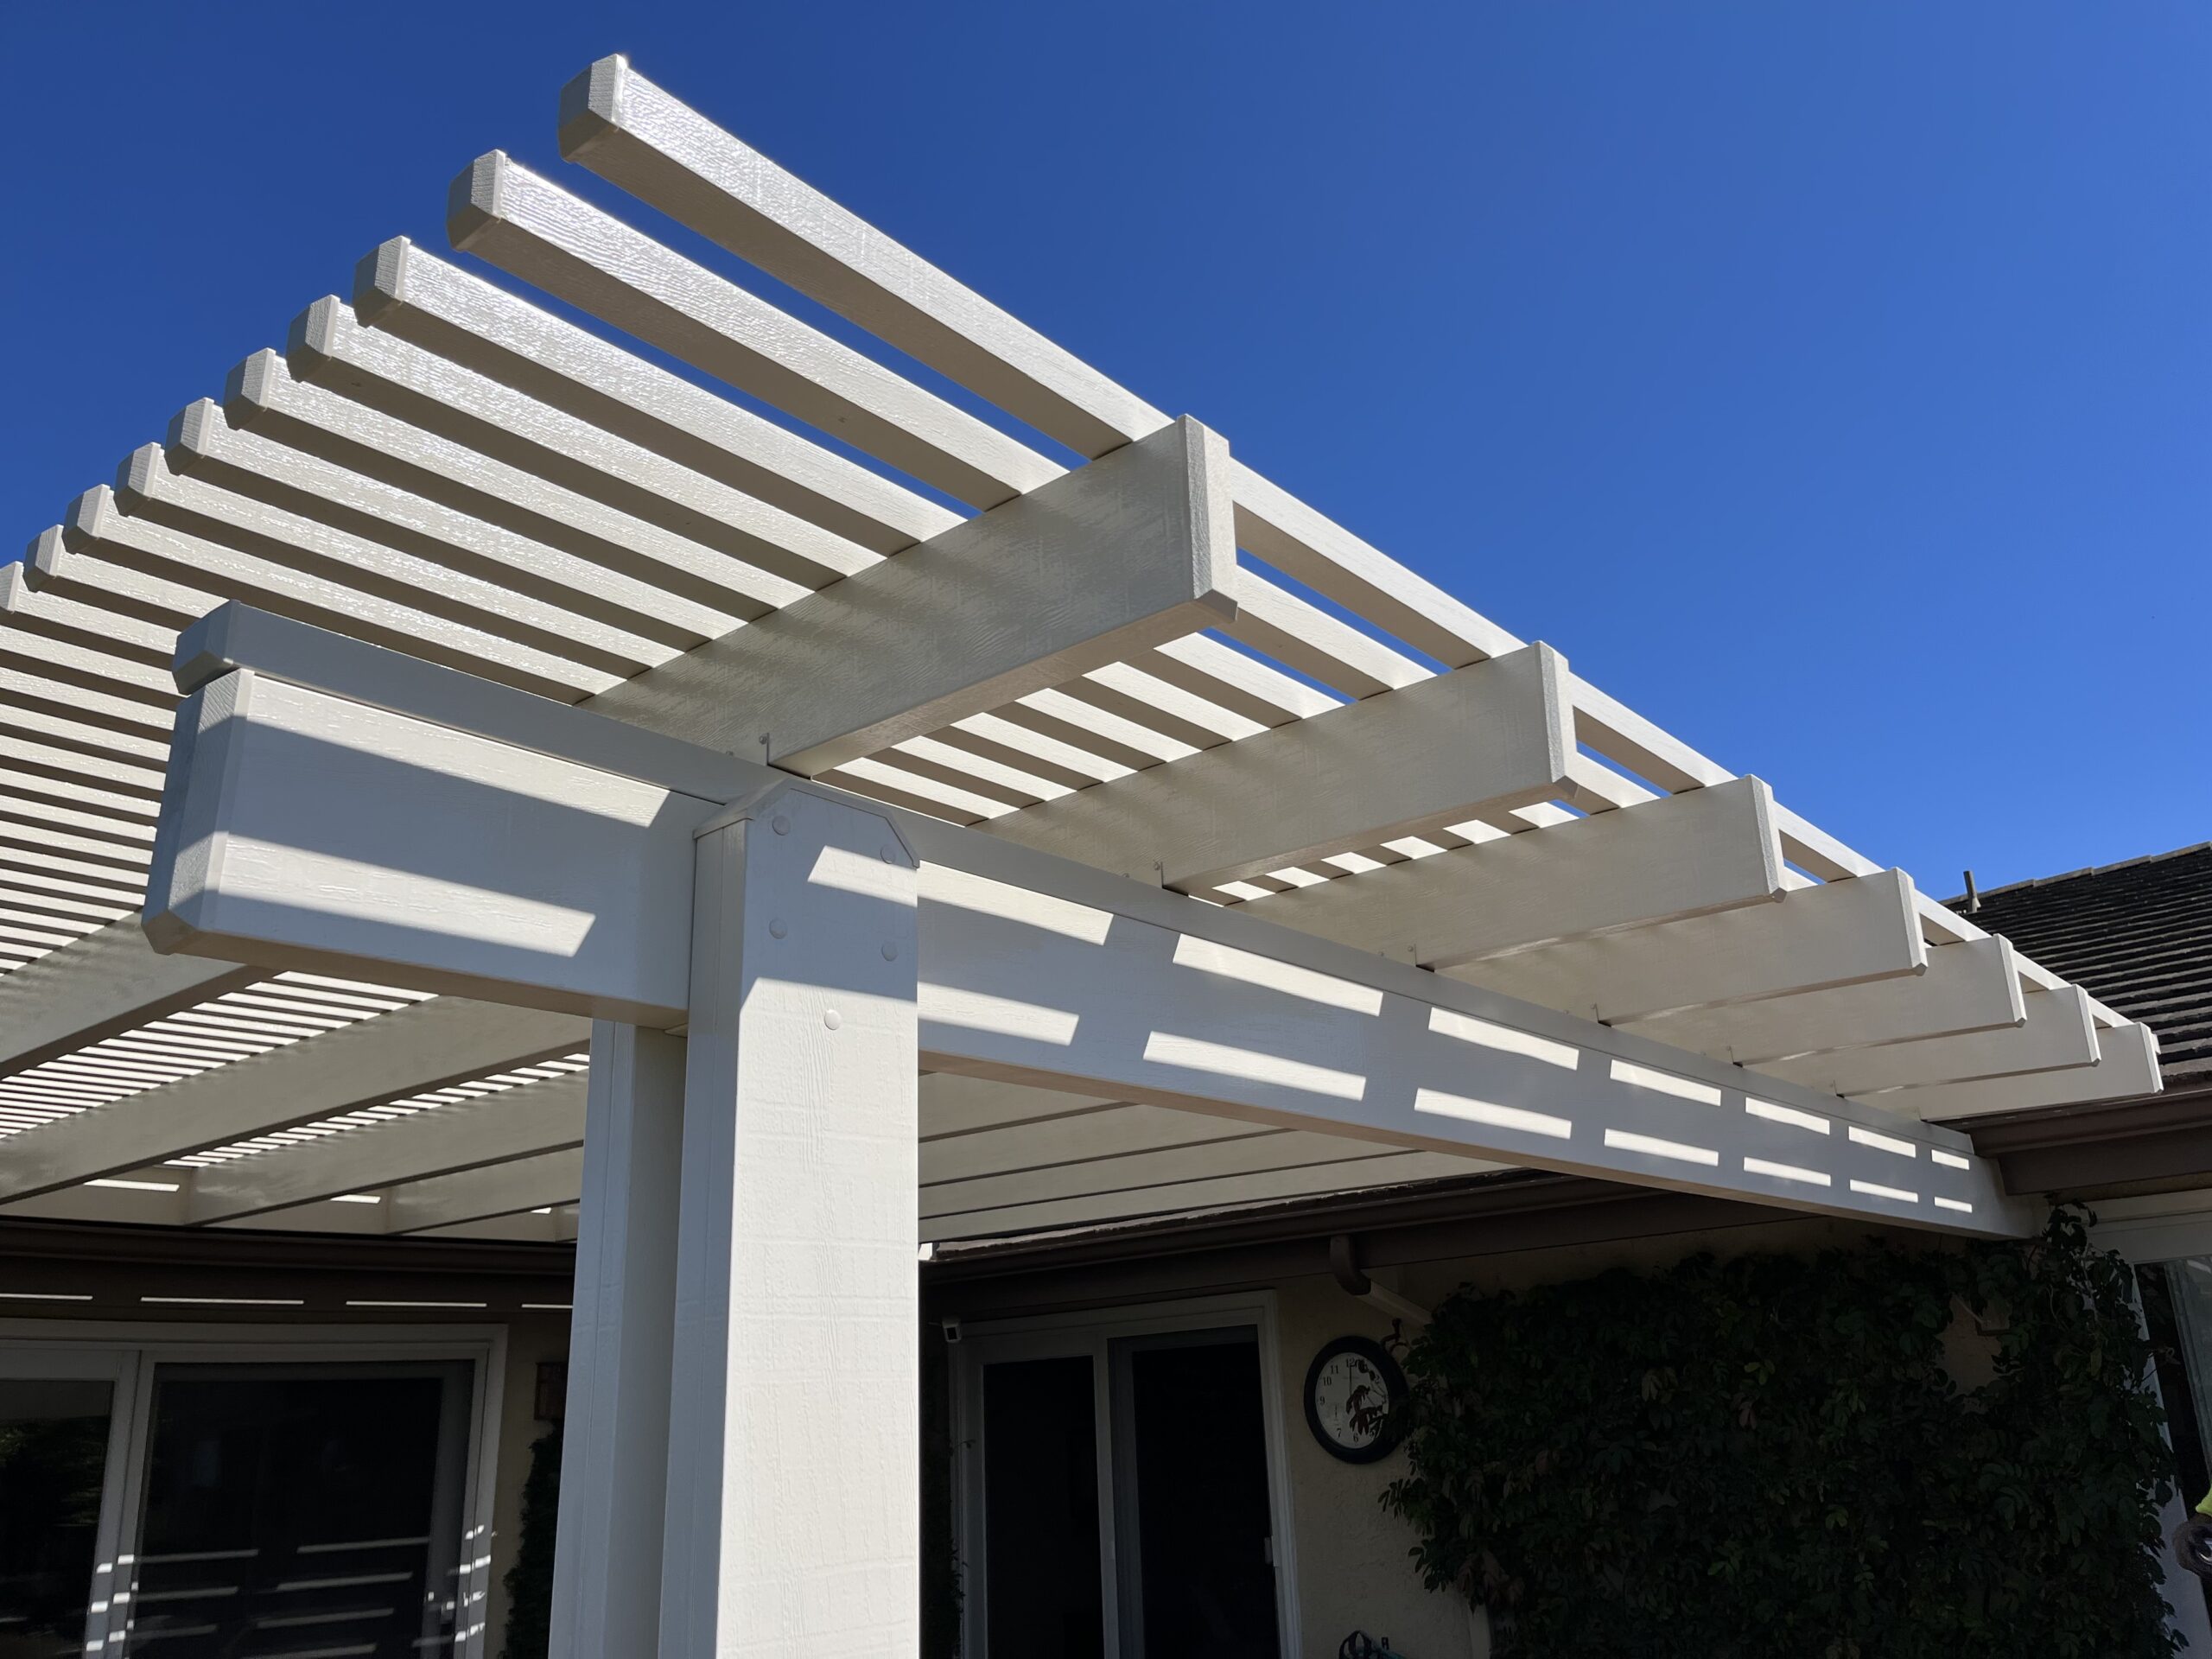 Alumawood Patio Covers in Fountain Valley, CA.